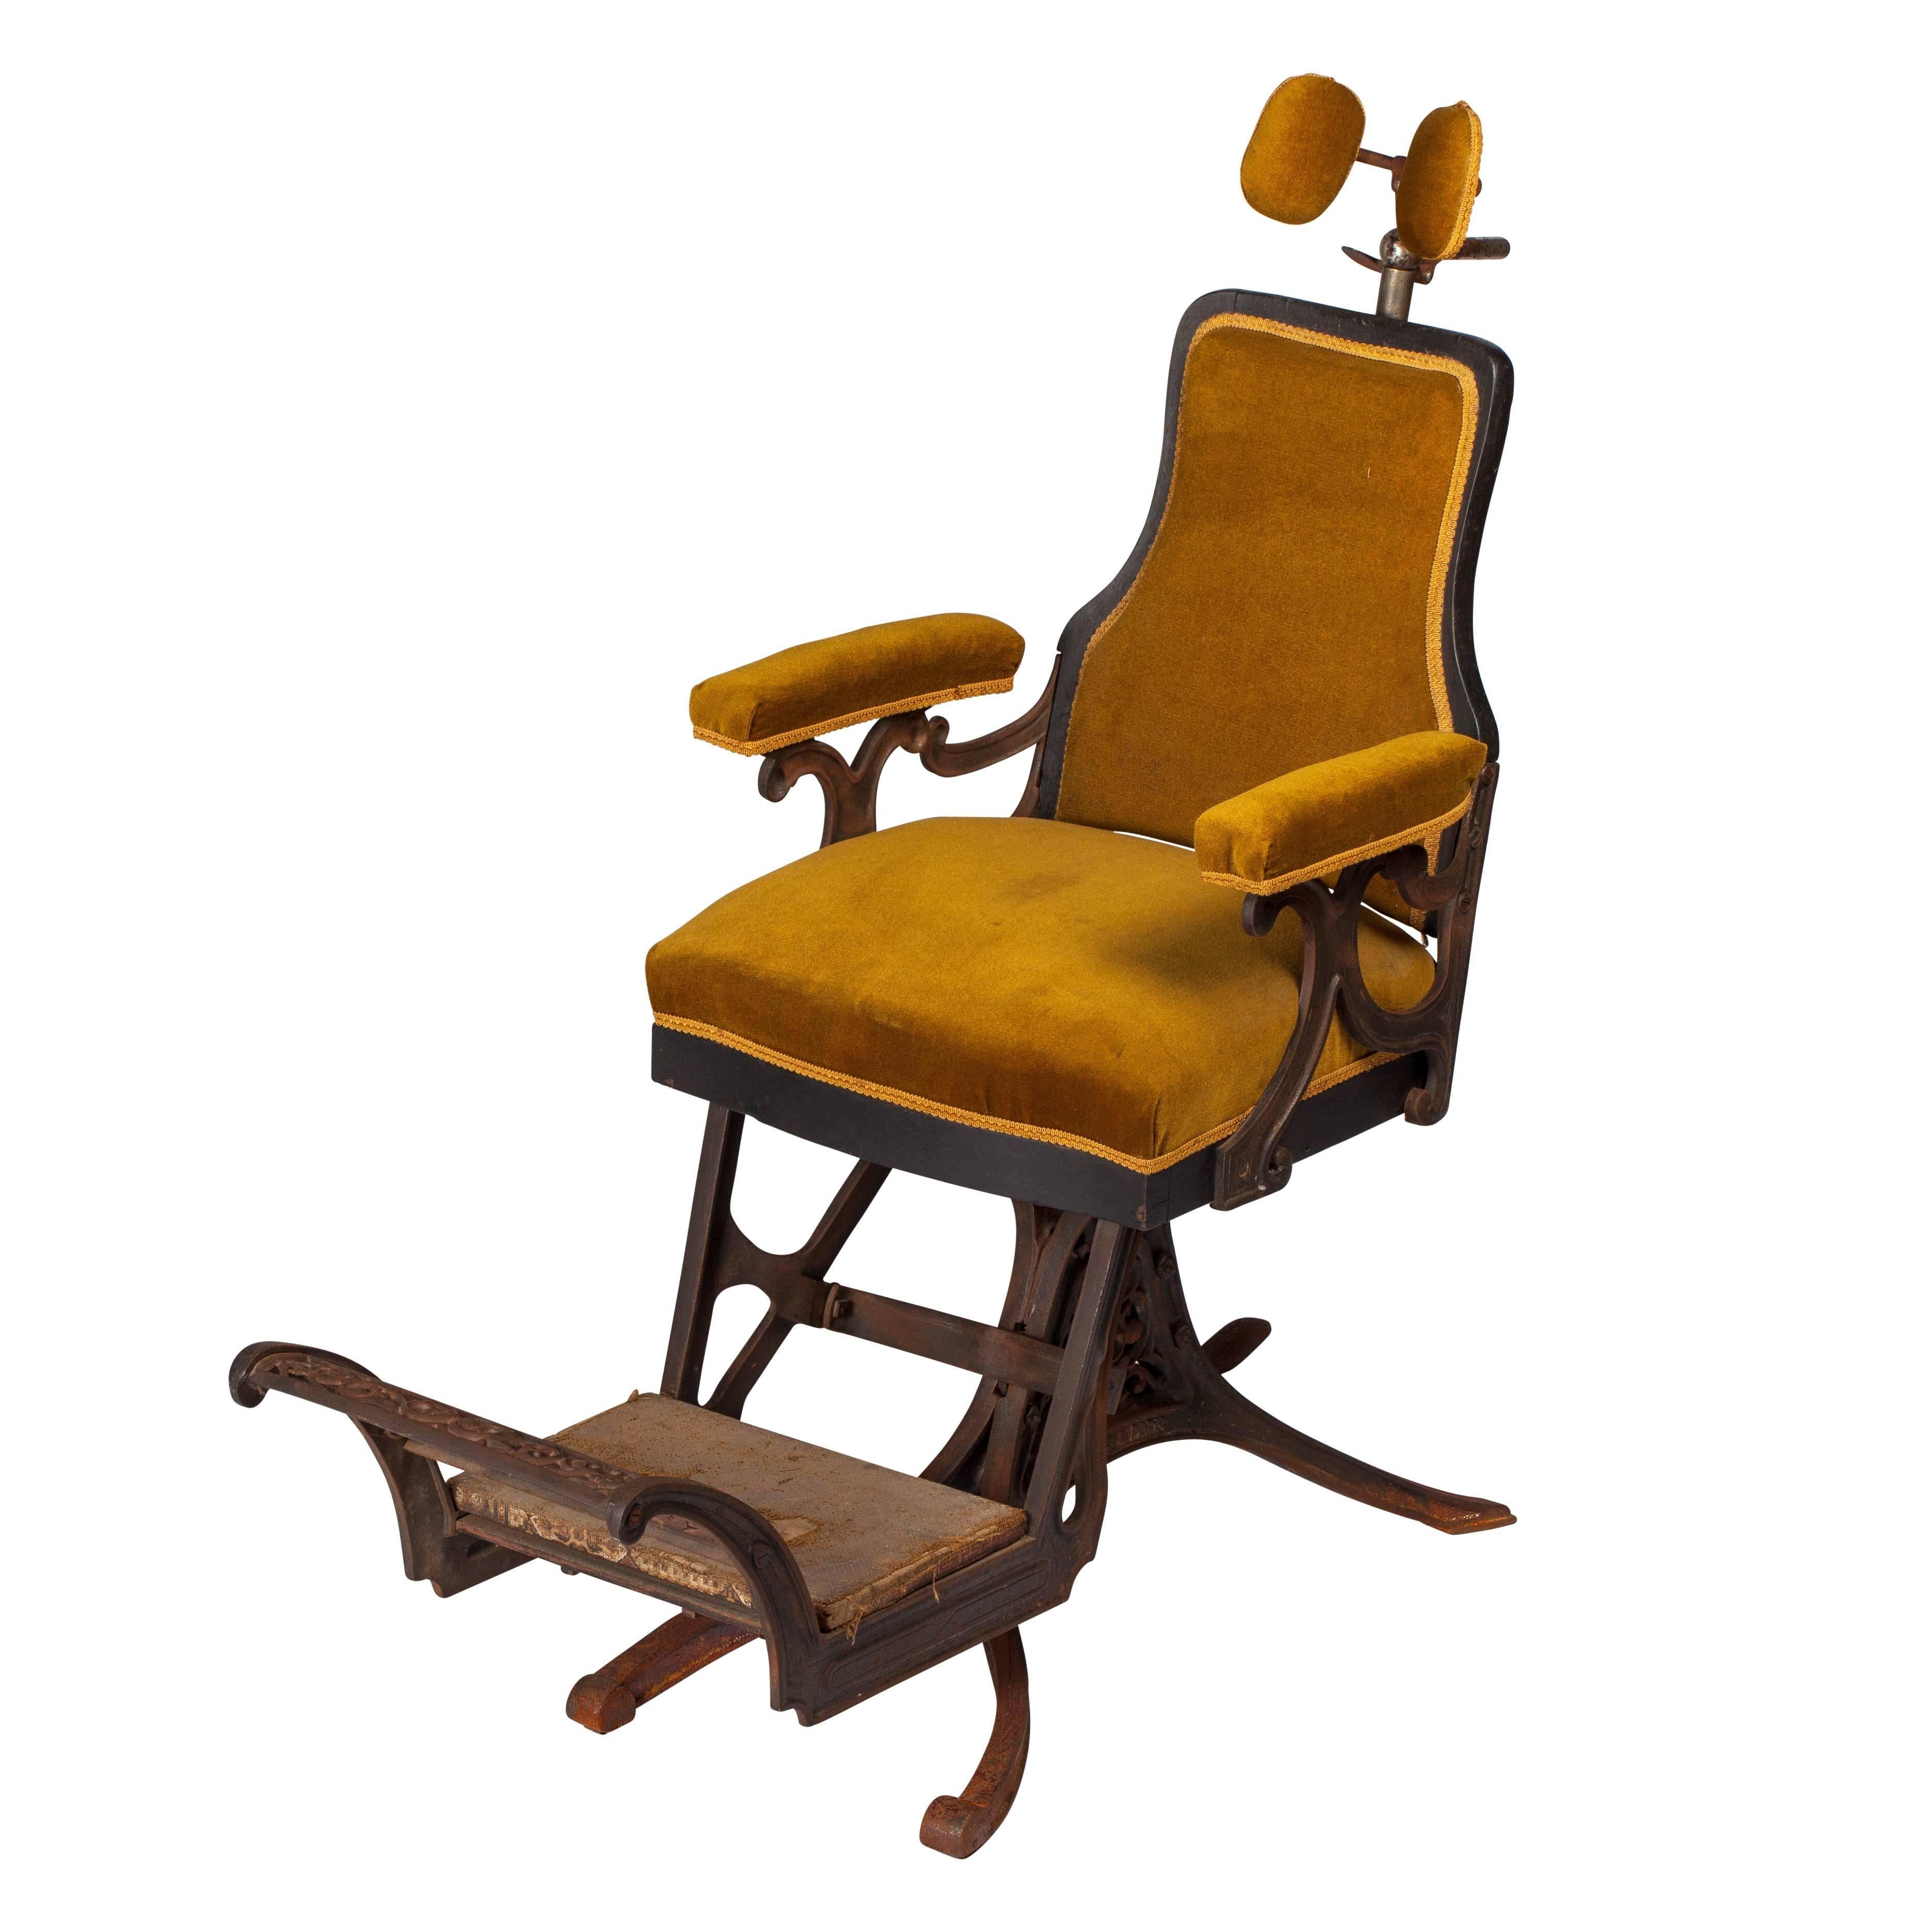 Impressive dentist chair, late 19th century cast iron with seat and headrest in velvet. It is adjustable and can be tilted. This model was manufactured by Louis Alexandre Billard, 1890. The back is covered with leather.